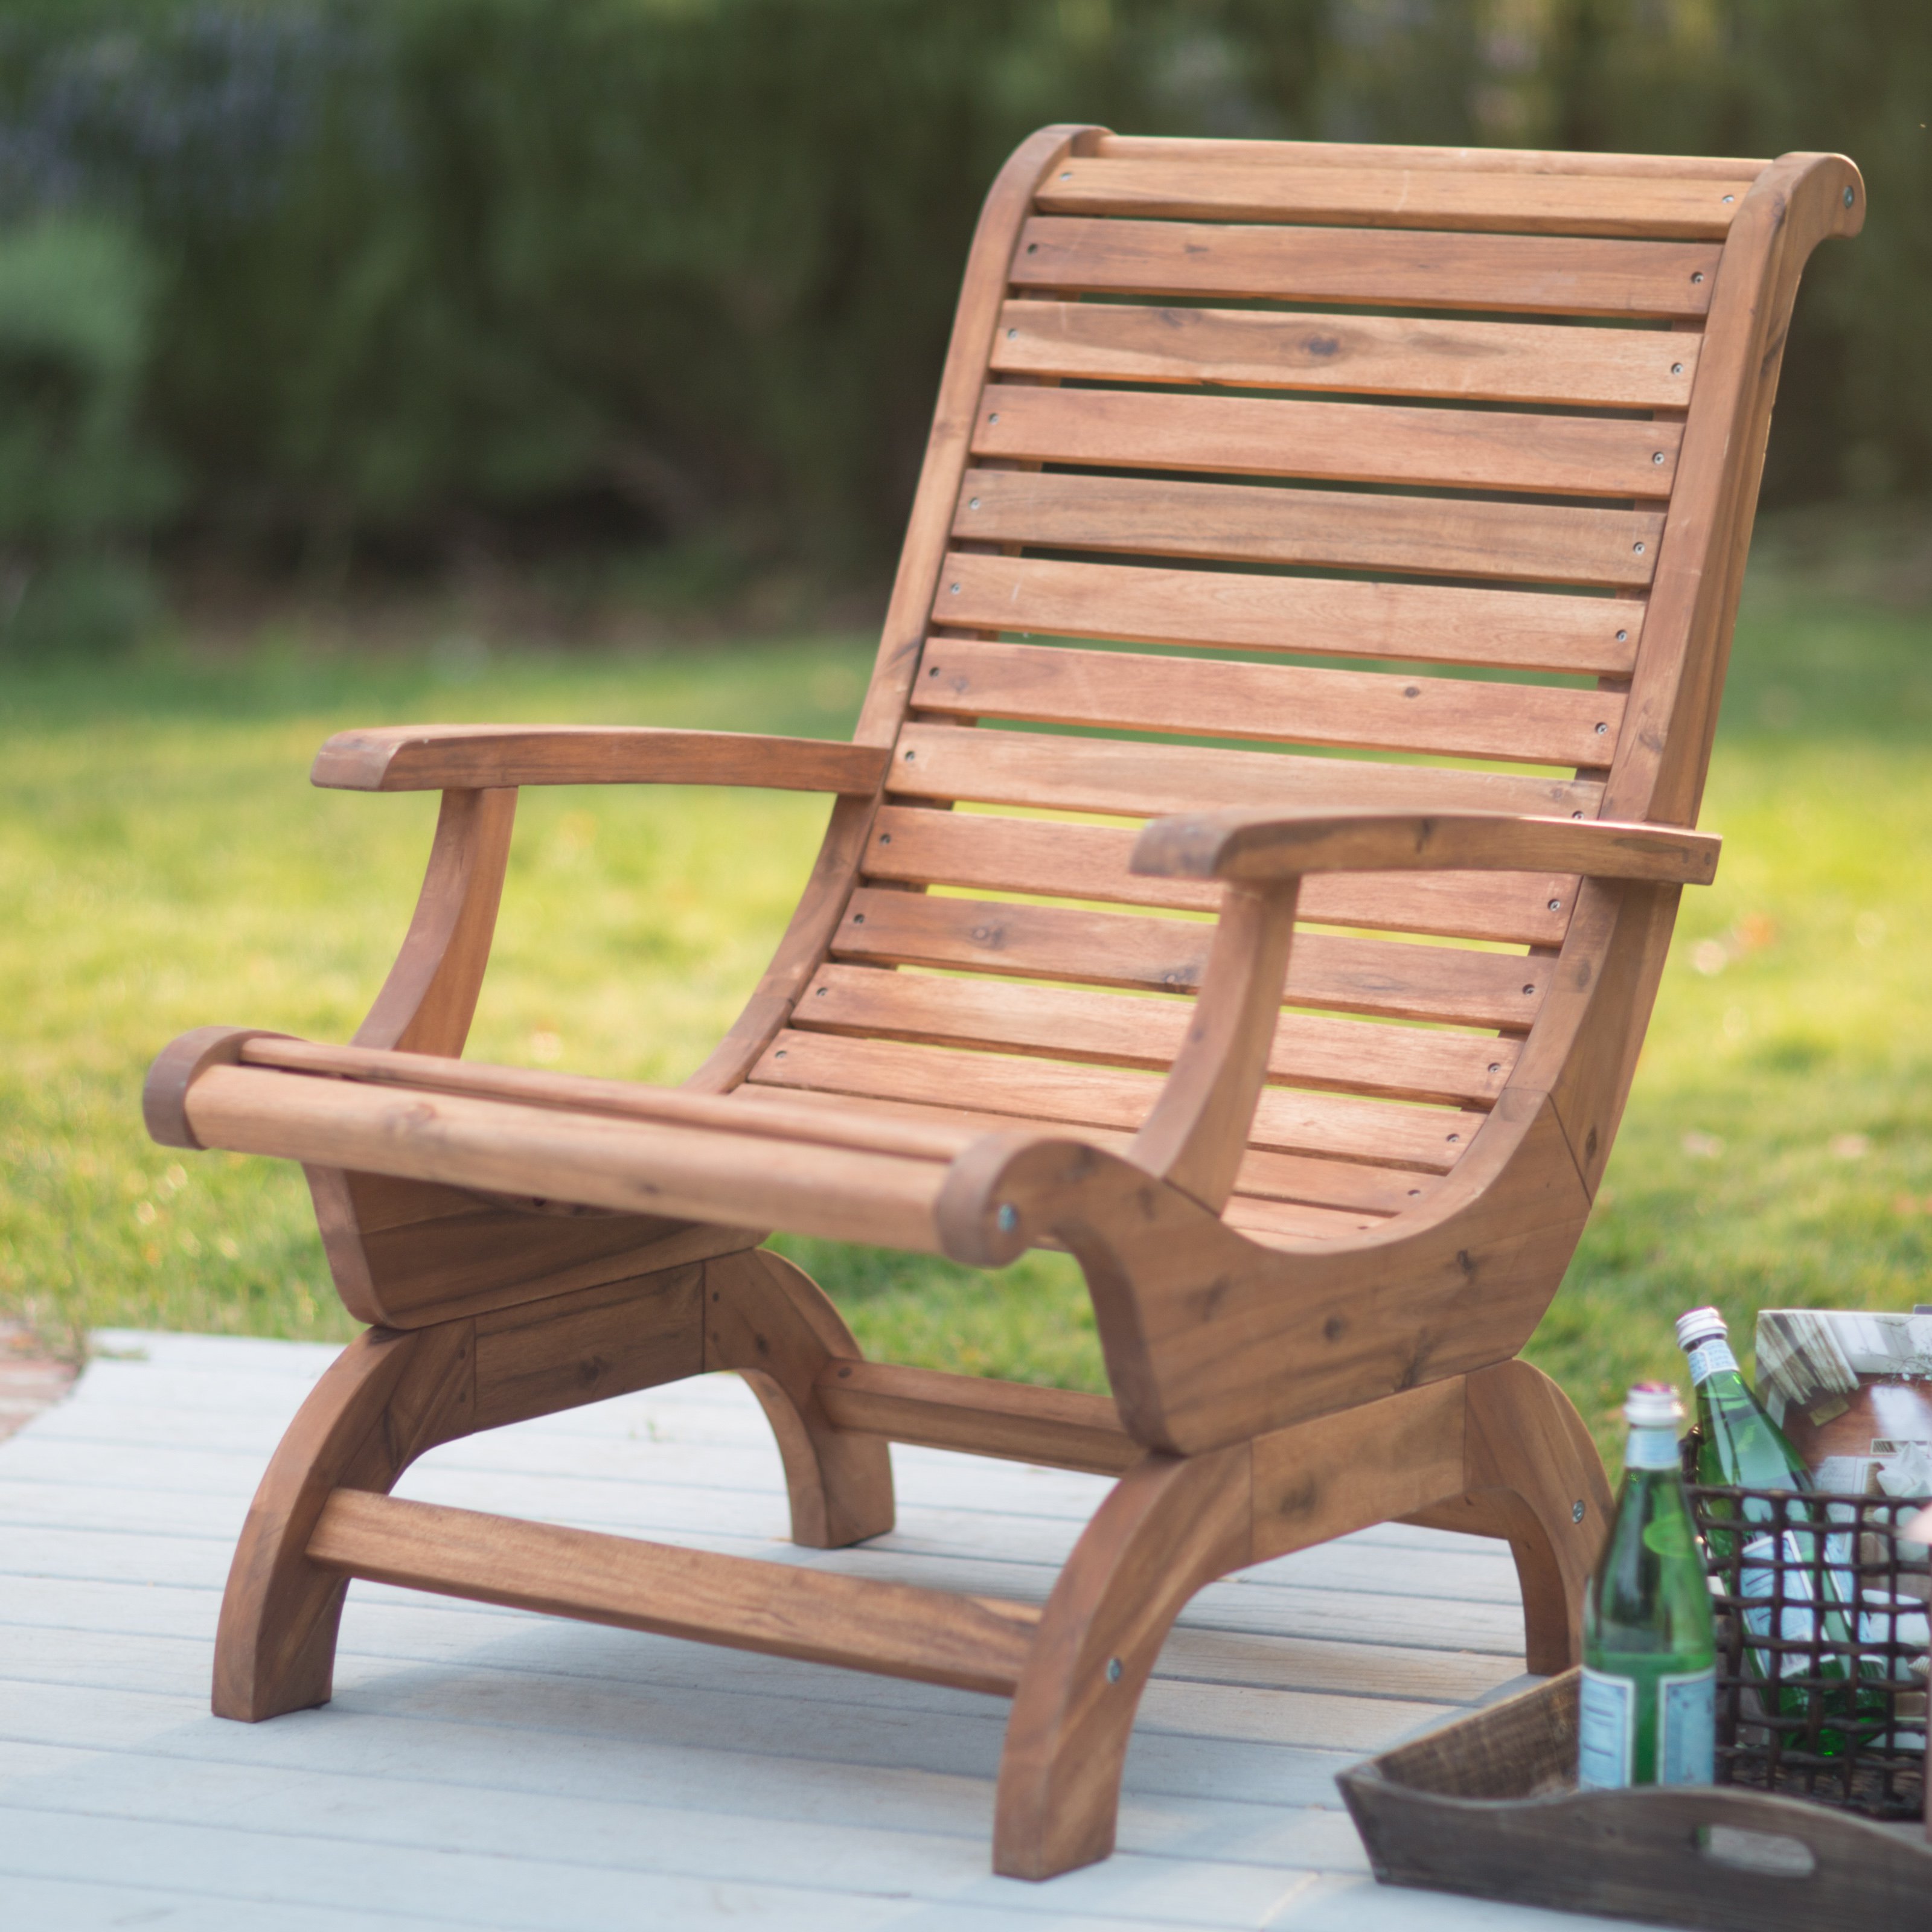 Which adirondack chair is the right one?